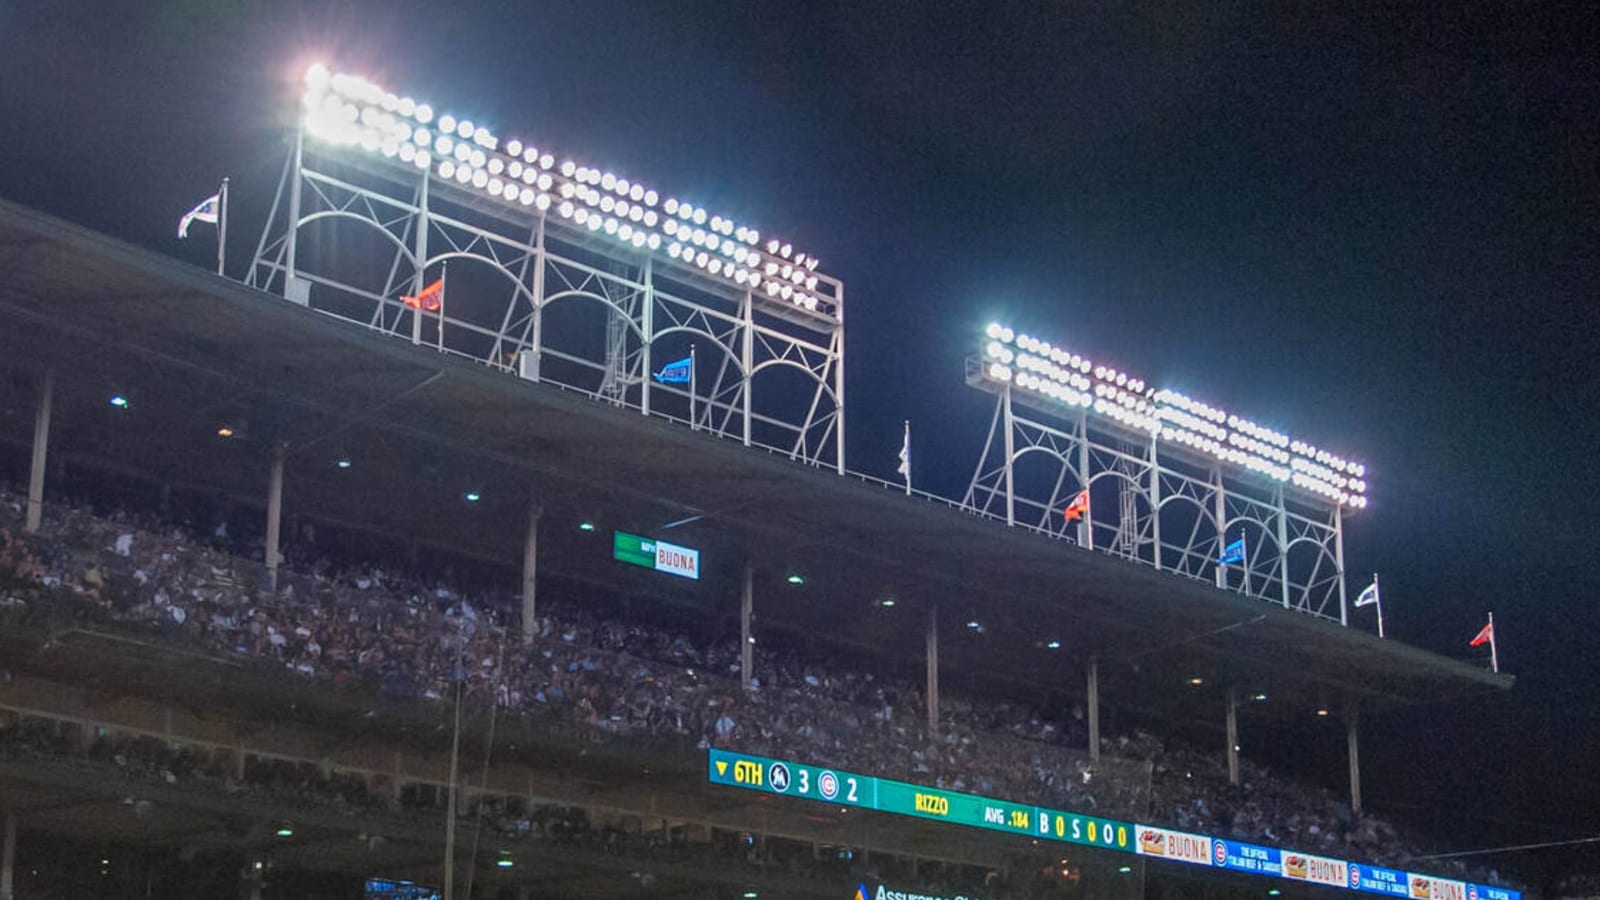 Cubs' new lighting system at Wrigley Field wreaking havoc